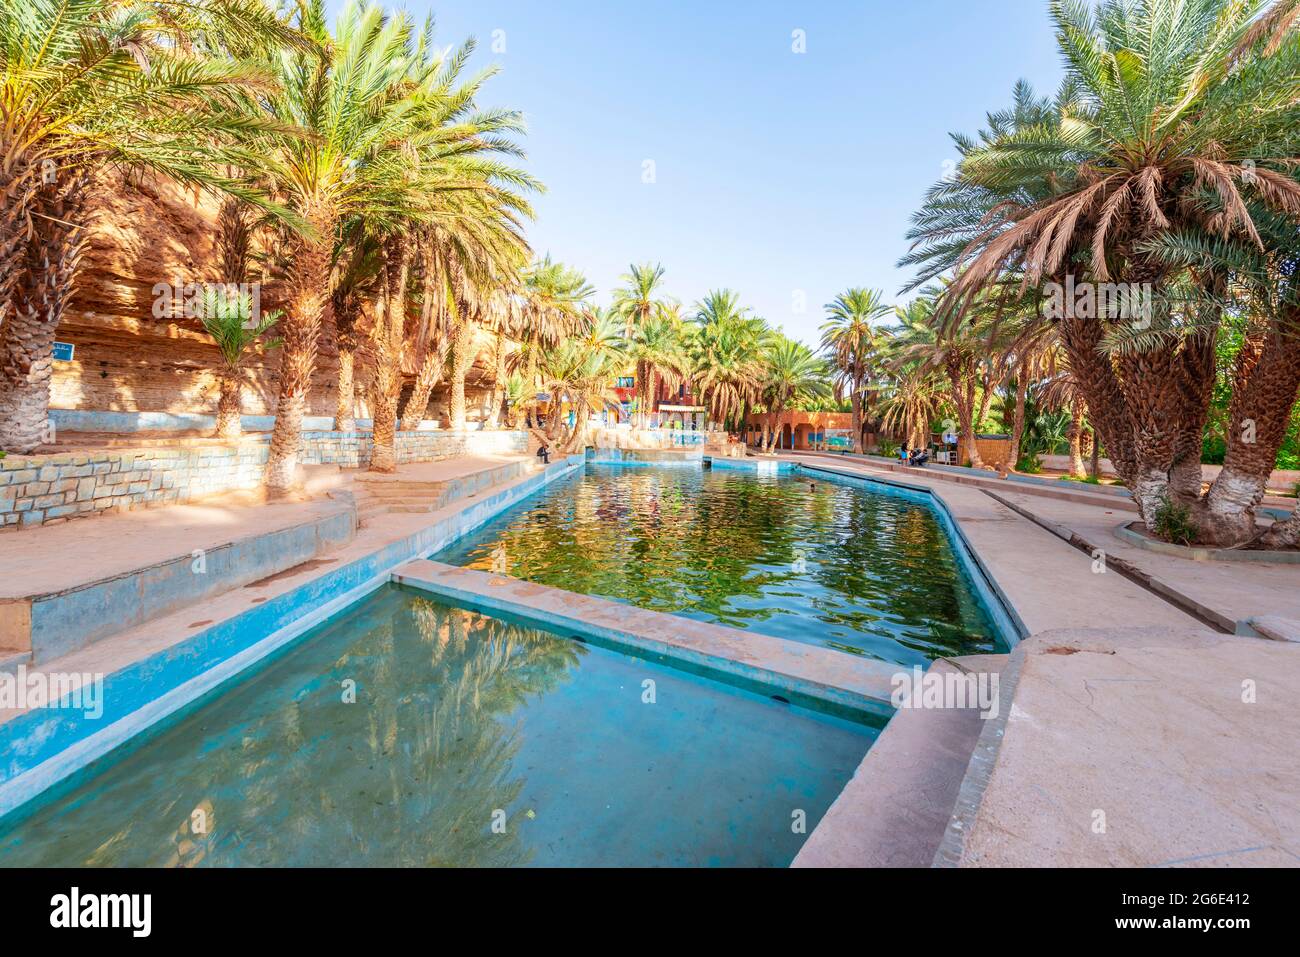 Swimming pool with palm trees, Oasis Source Bleu, Blue Spring, Madkhal Meski, Morocco Stock Photo